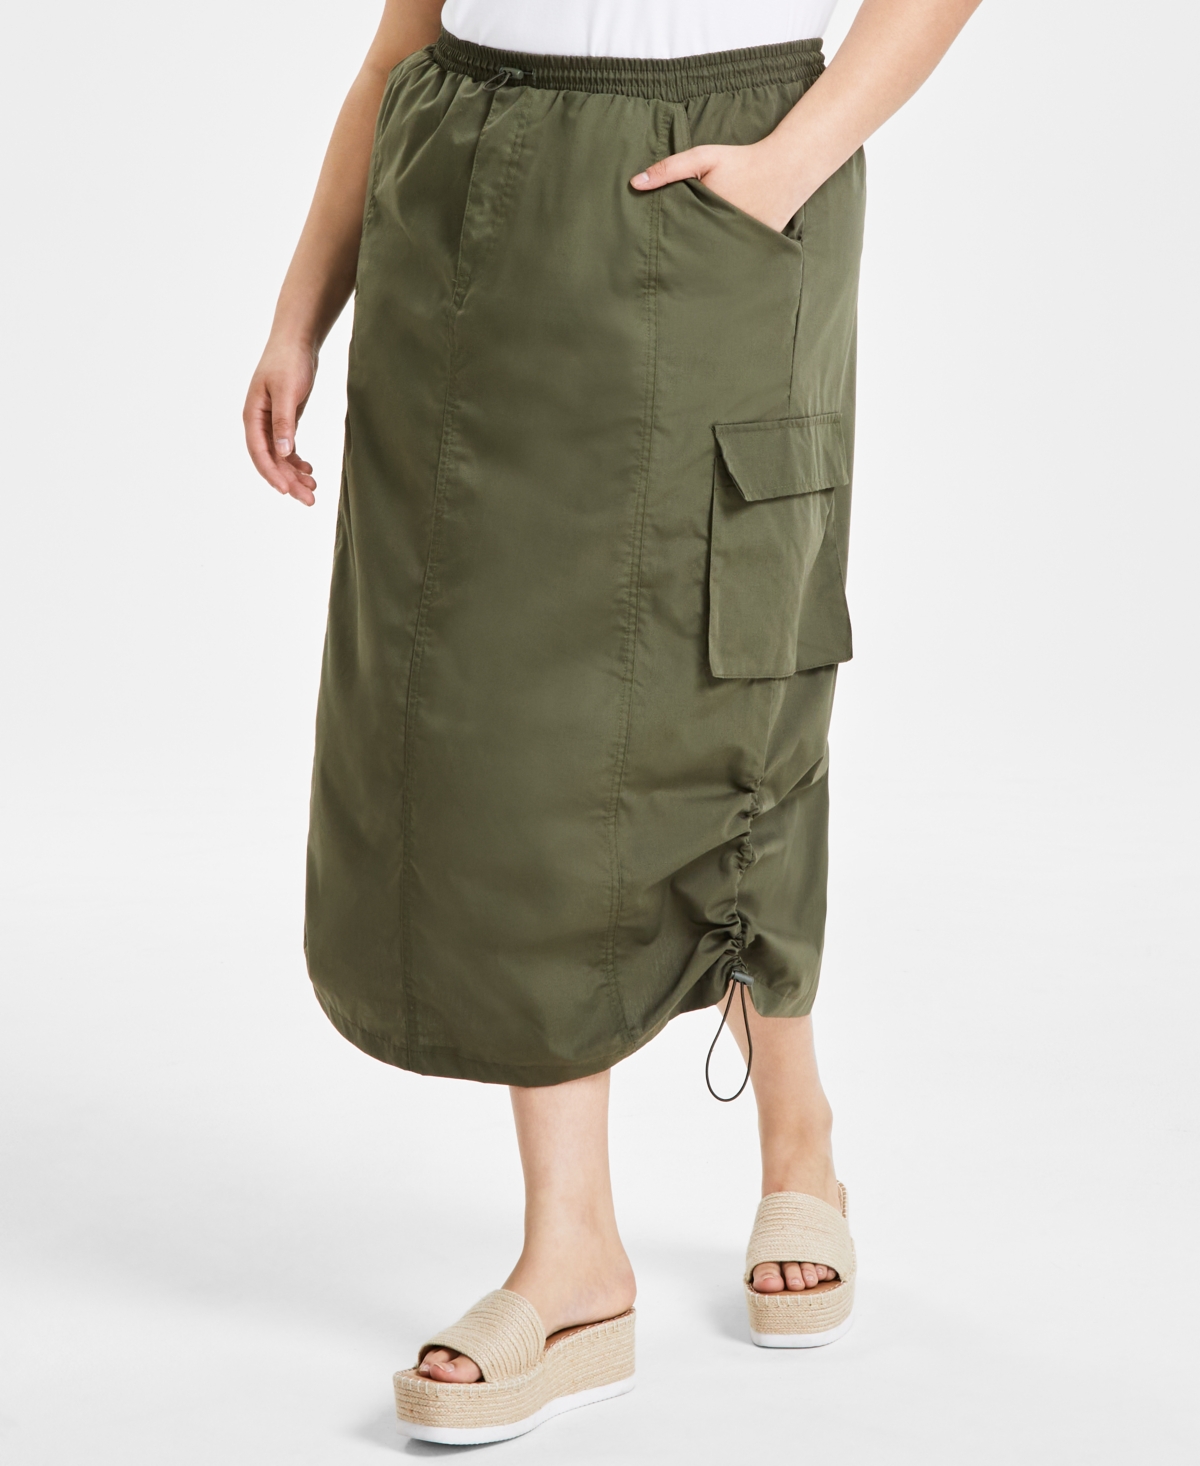 Full Circle Trends Trendy Plus Size Utility Cargo Midi Skirt In Olive